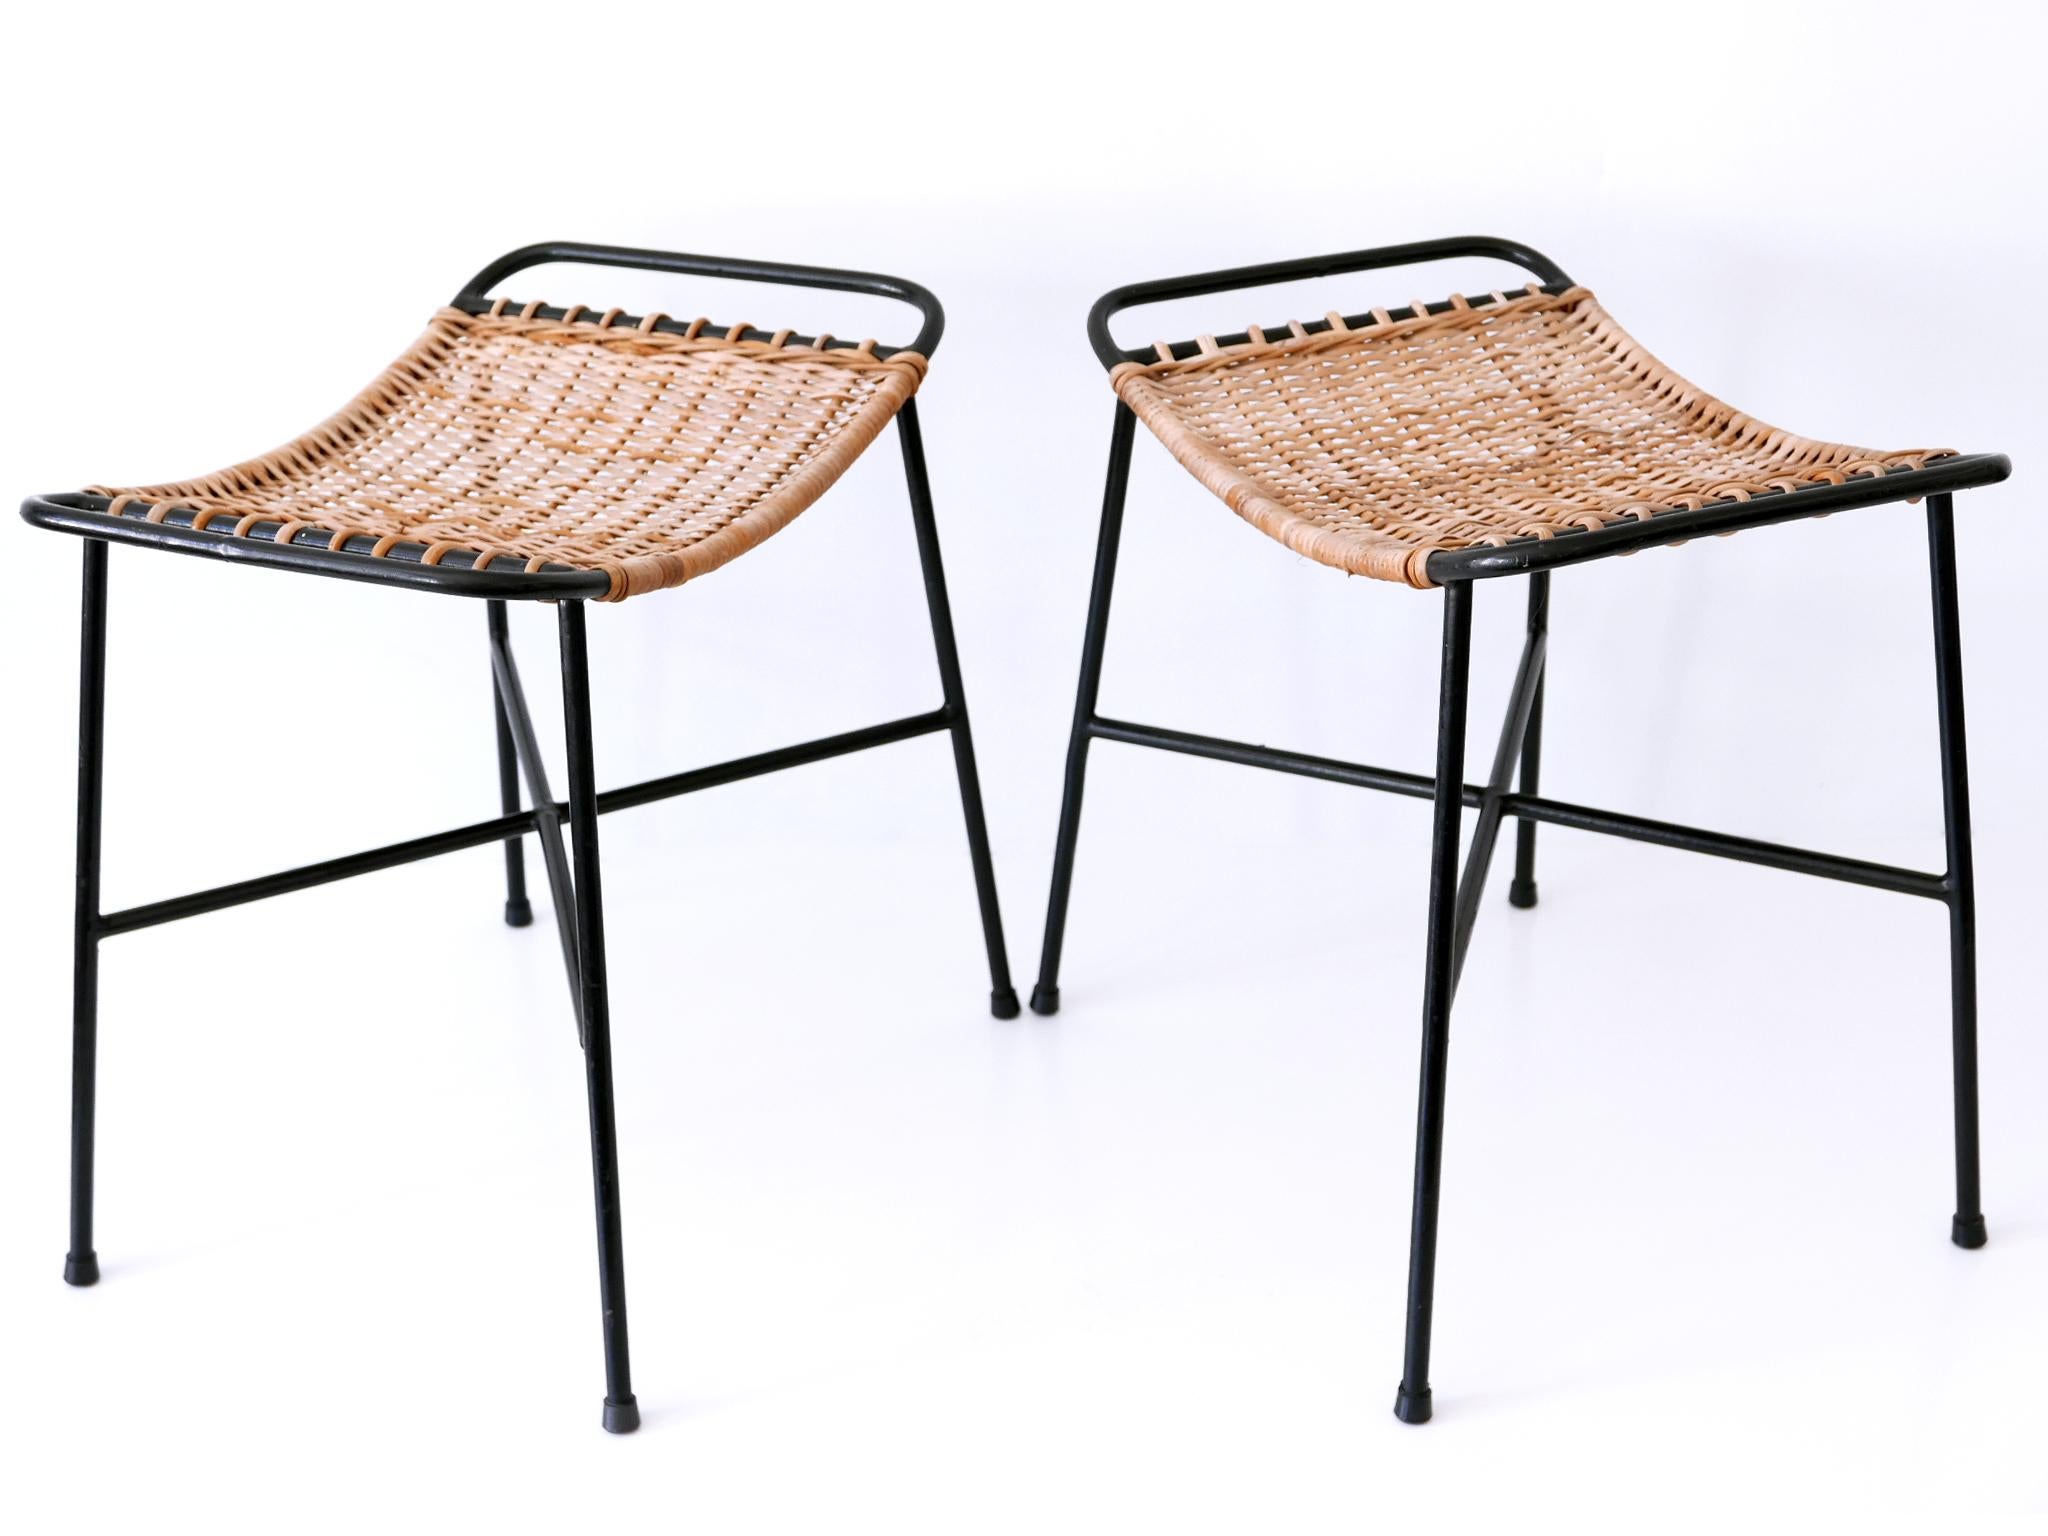 Mid-20th Century Set of Two Lovely Mid-Century Modern Rattan Stools Germany 1960s For Sale